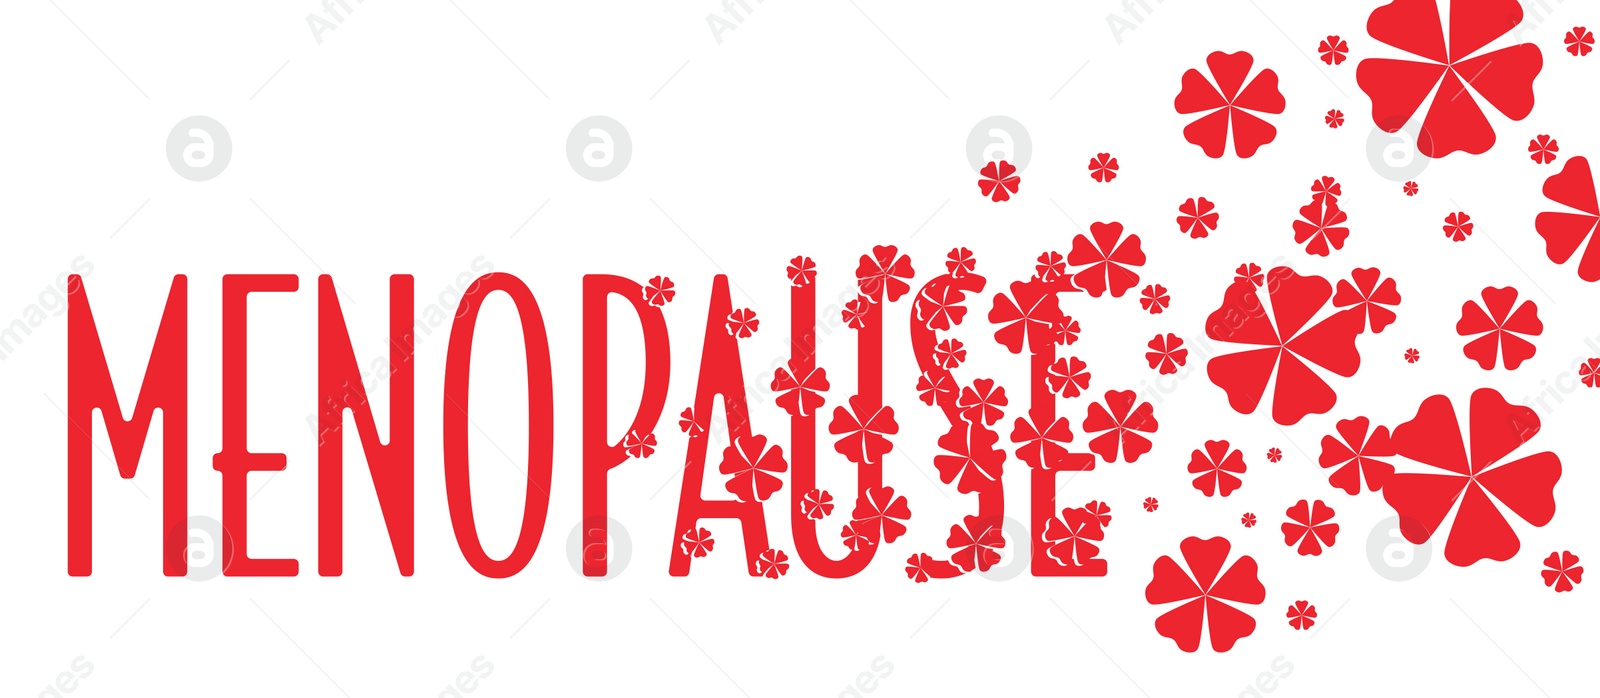 Illustration of Women's health changes. Word Menopause and flowers on white background, banner design